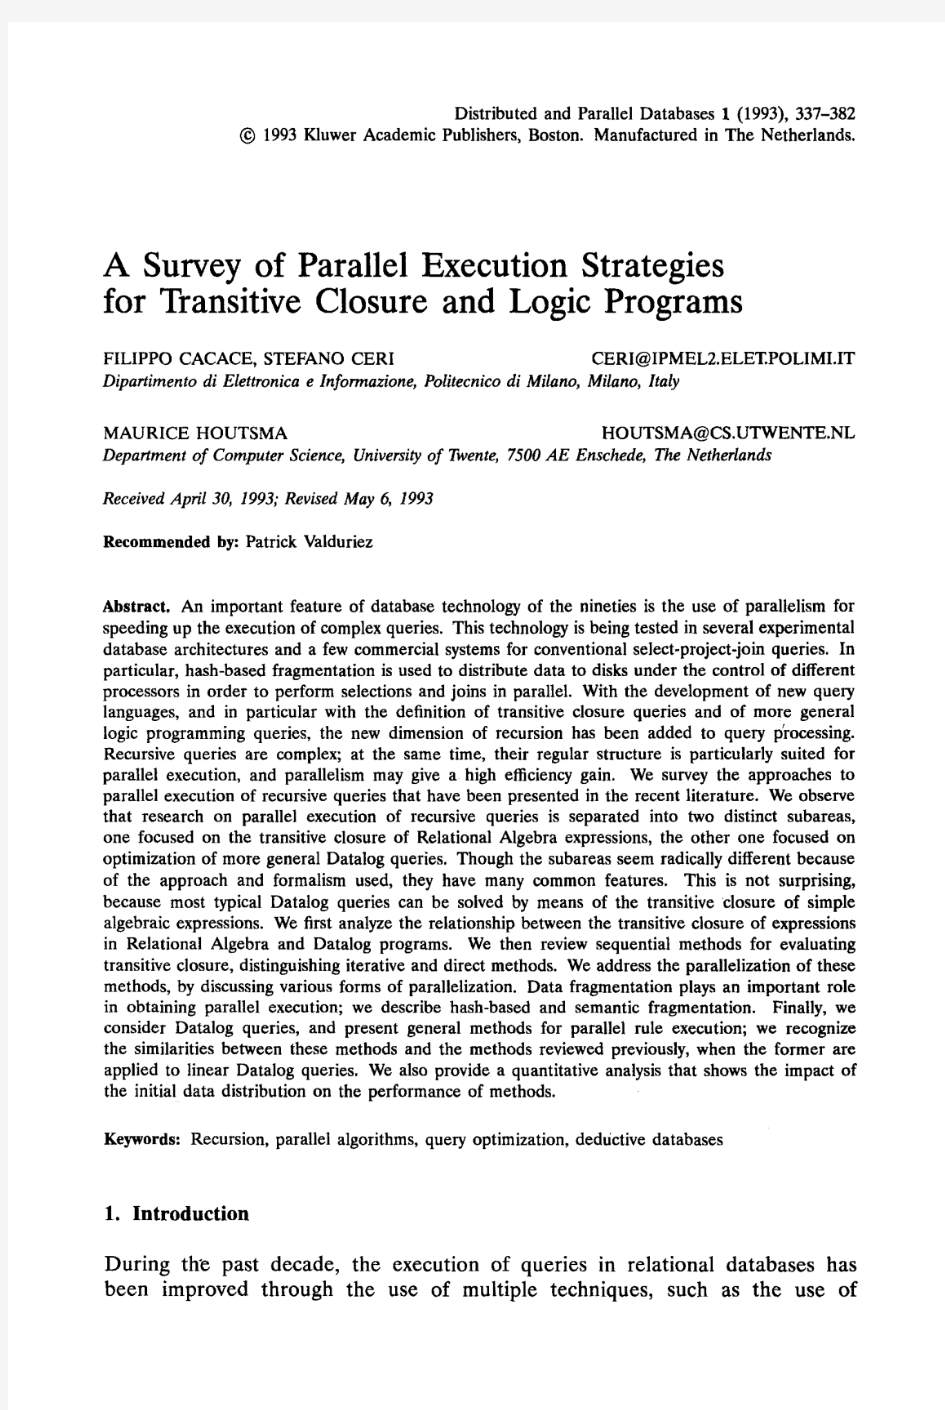 A survey of parallel execution strategies for transitive closure and logic programs